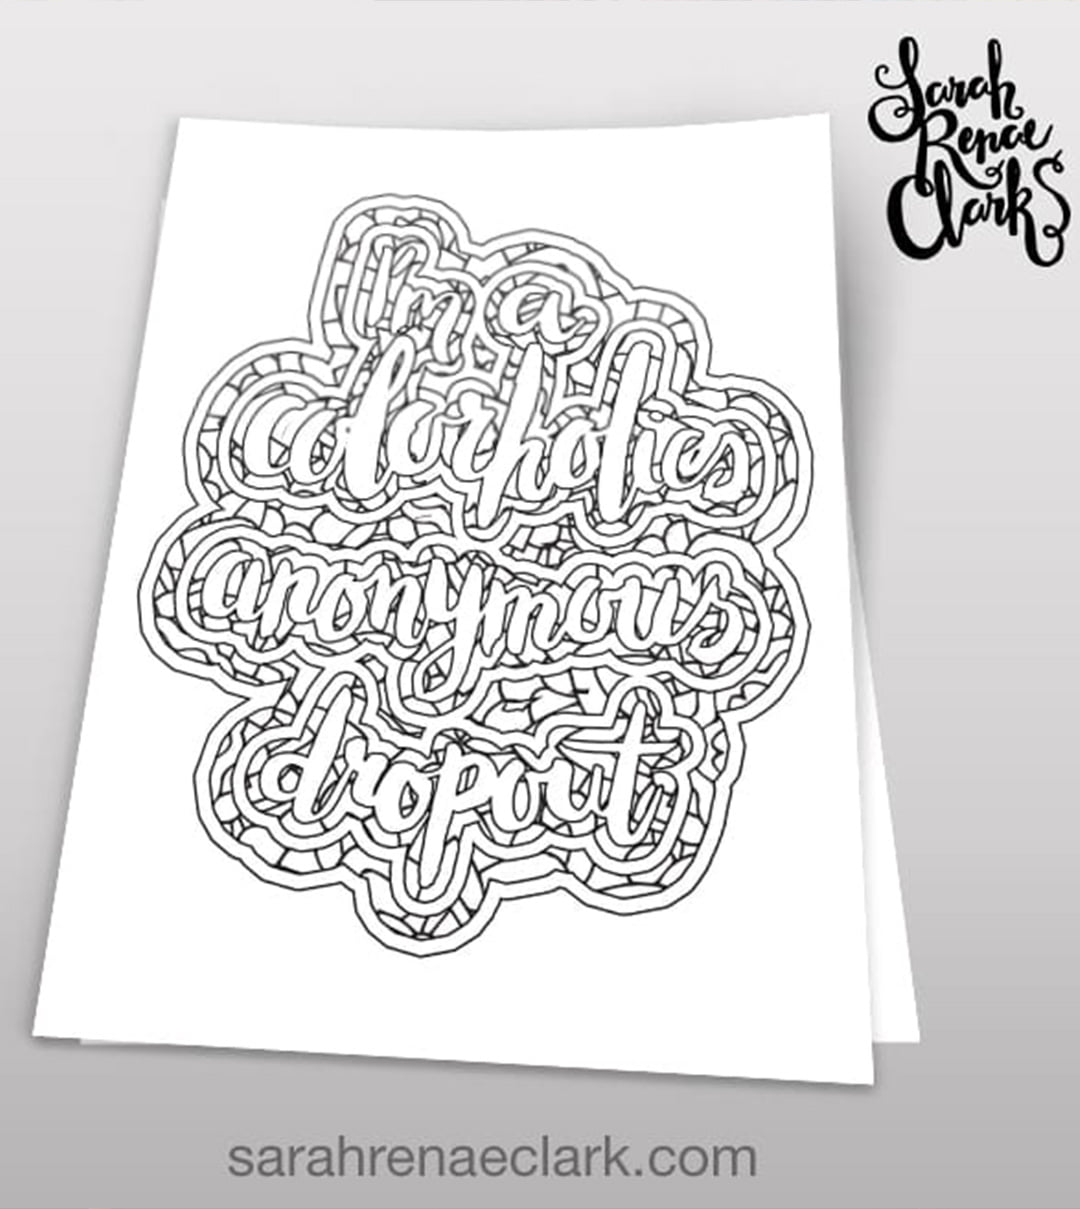 Free Coloring Page - I'm a Colorholics Anonymous Dropout